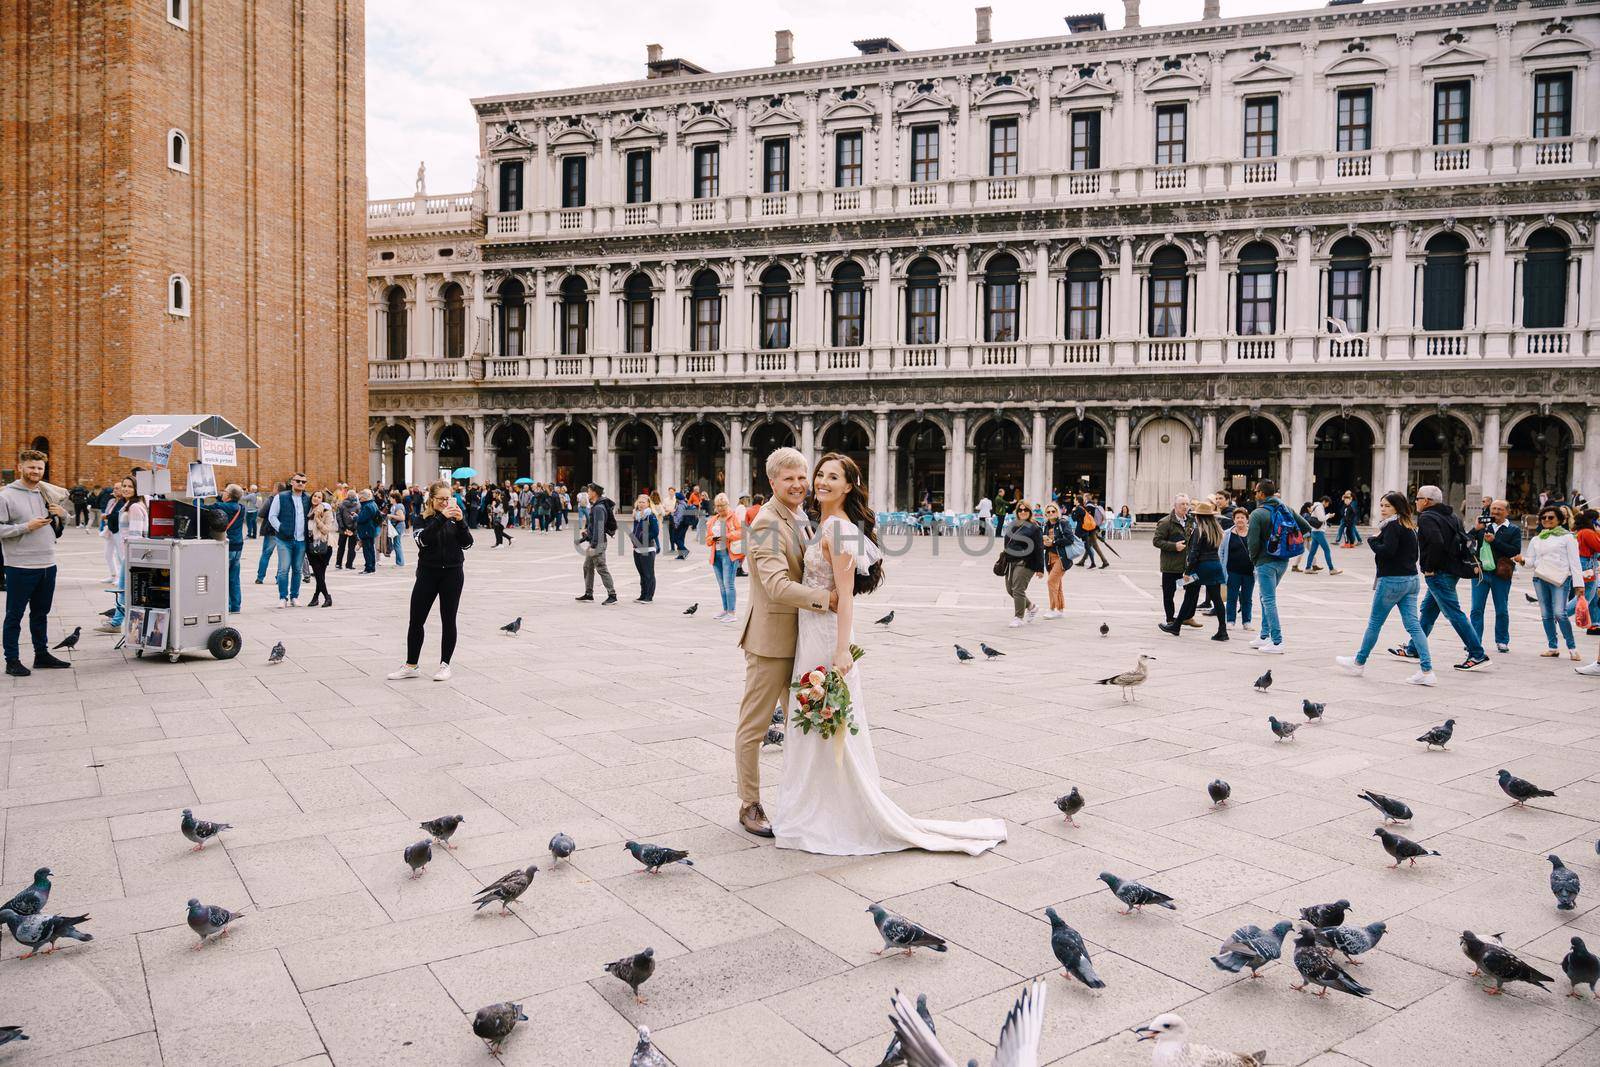 Wedding in Venice, Italy. Bride and groom are looking at camera among the pigeons in Piazza San Marco, against backdrop of National Archaeological Museum Venice, surrounded by a crowd of tourists.